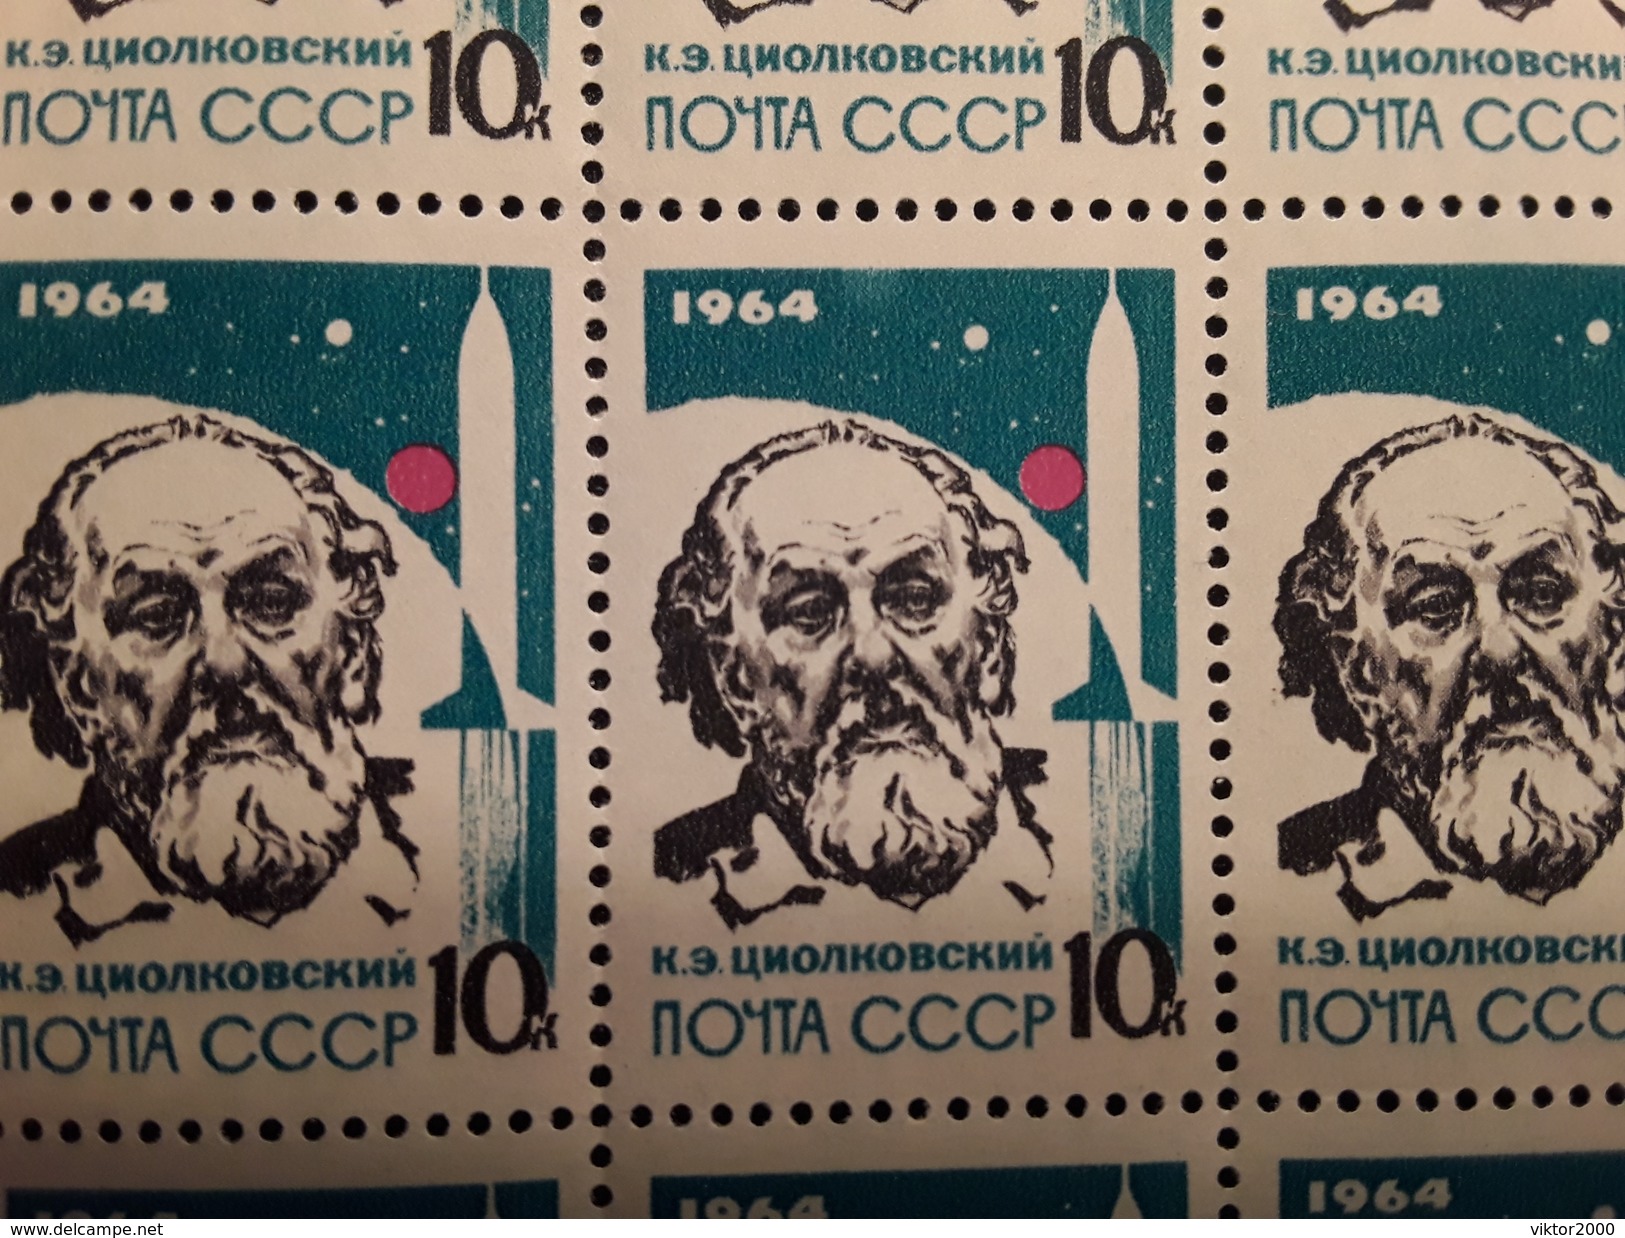 RUSSIA 1964 MNH (**)MICHEL 2900 The Founder Of Rocketry.Tsiolkovsky - Hojas Completas